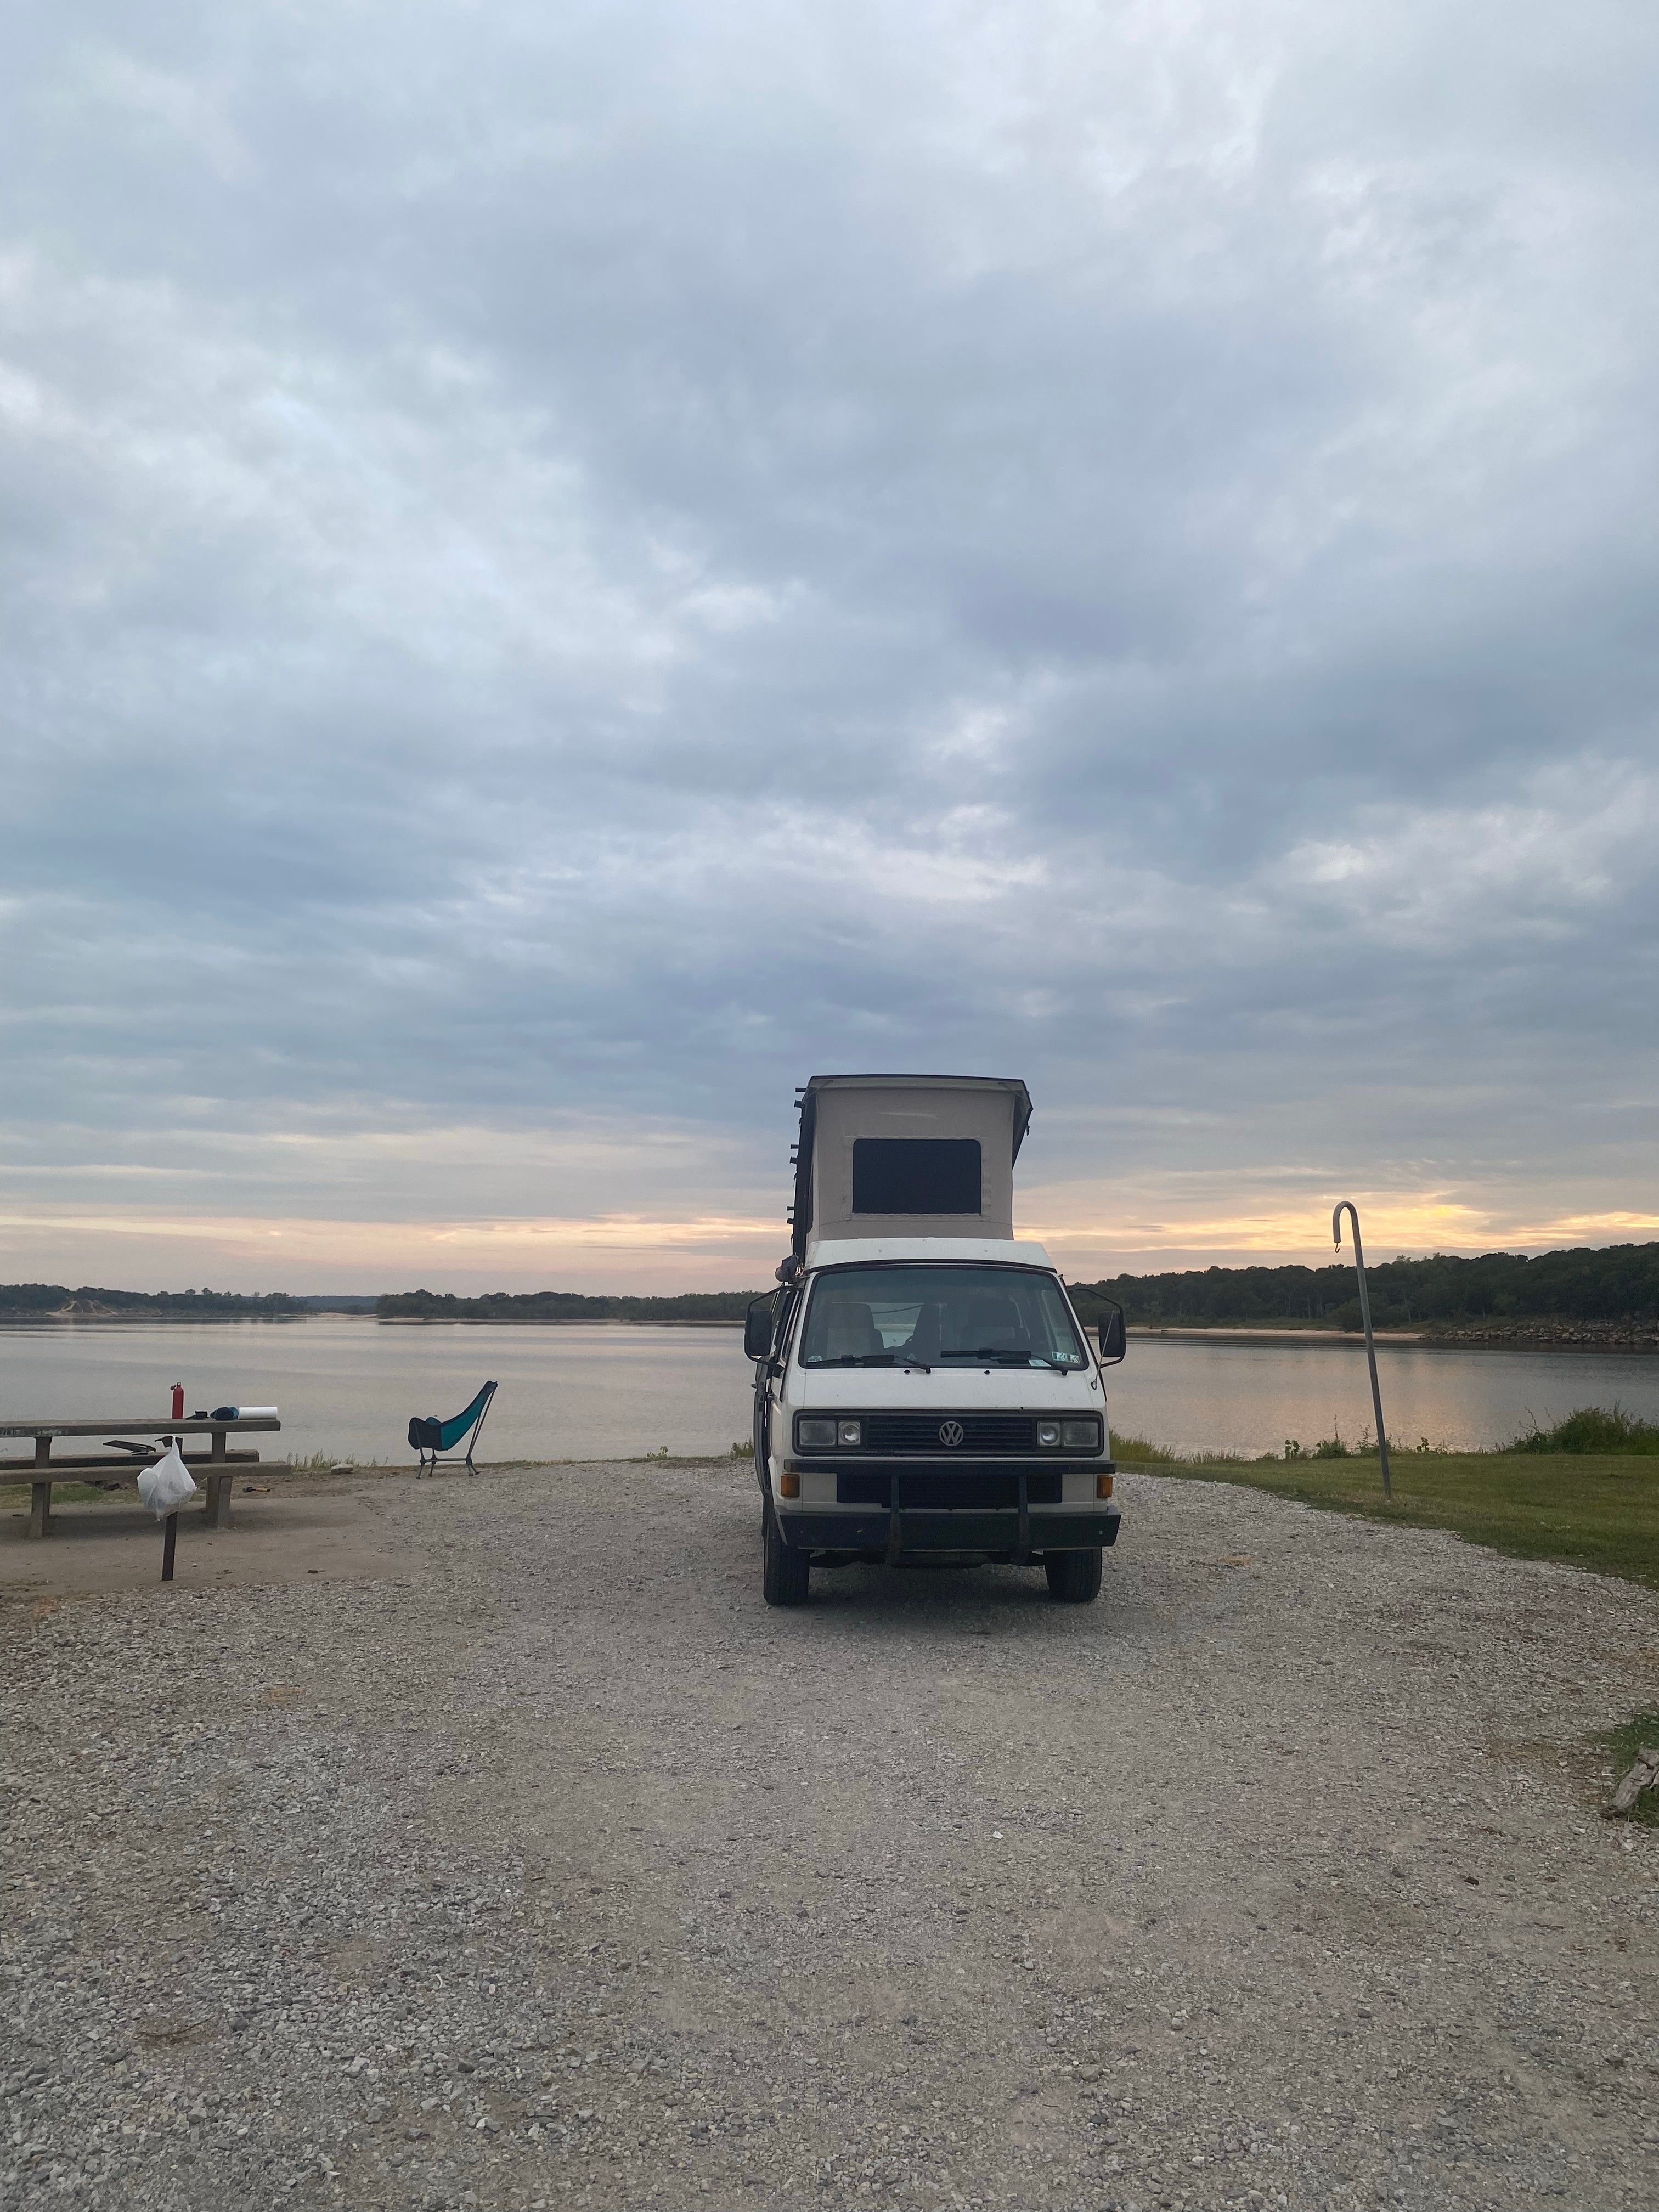 Camper submitted image from Appalachia Bay - 1